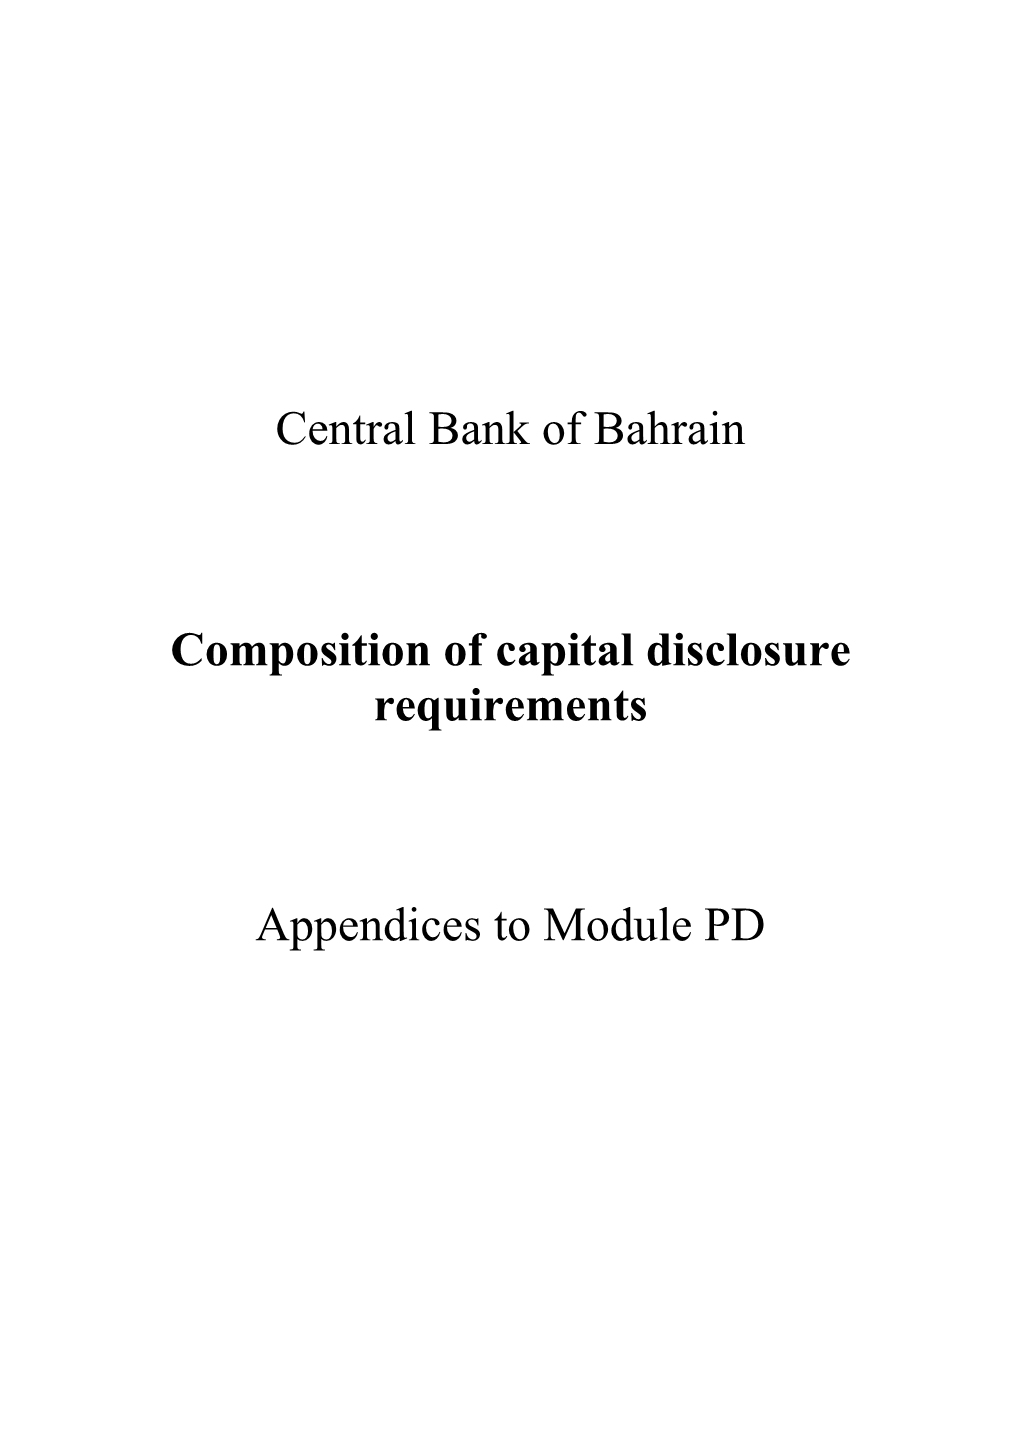 Central Bank of Bahrain Composition of Capital Disclosure Requirements